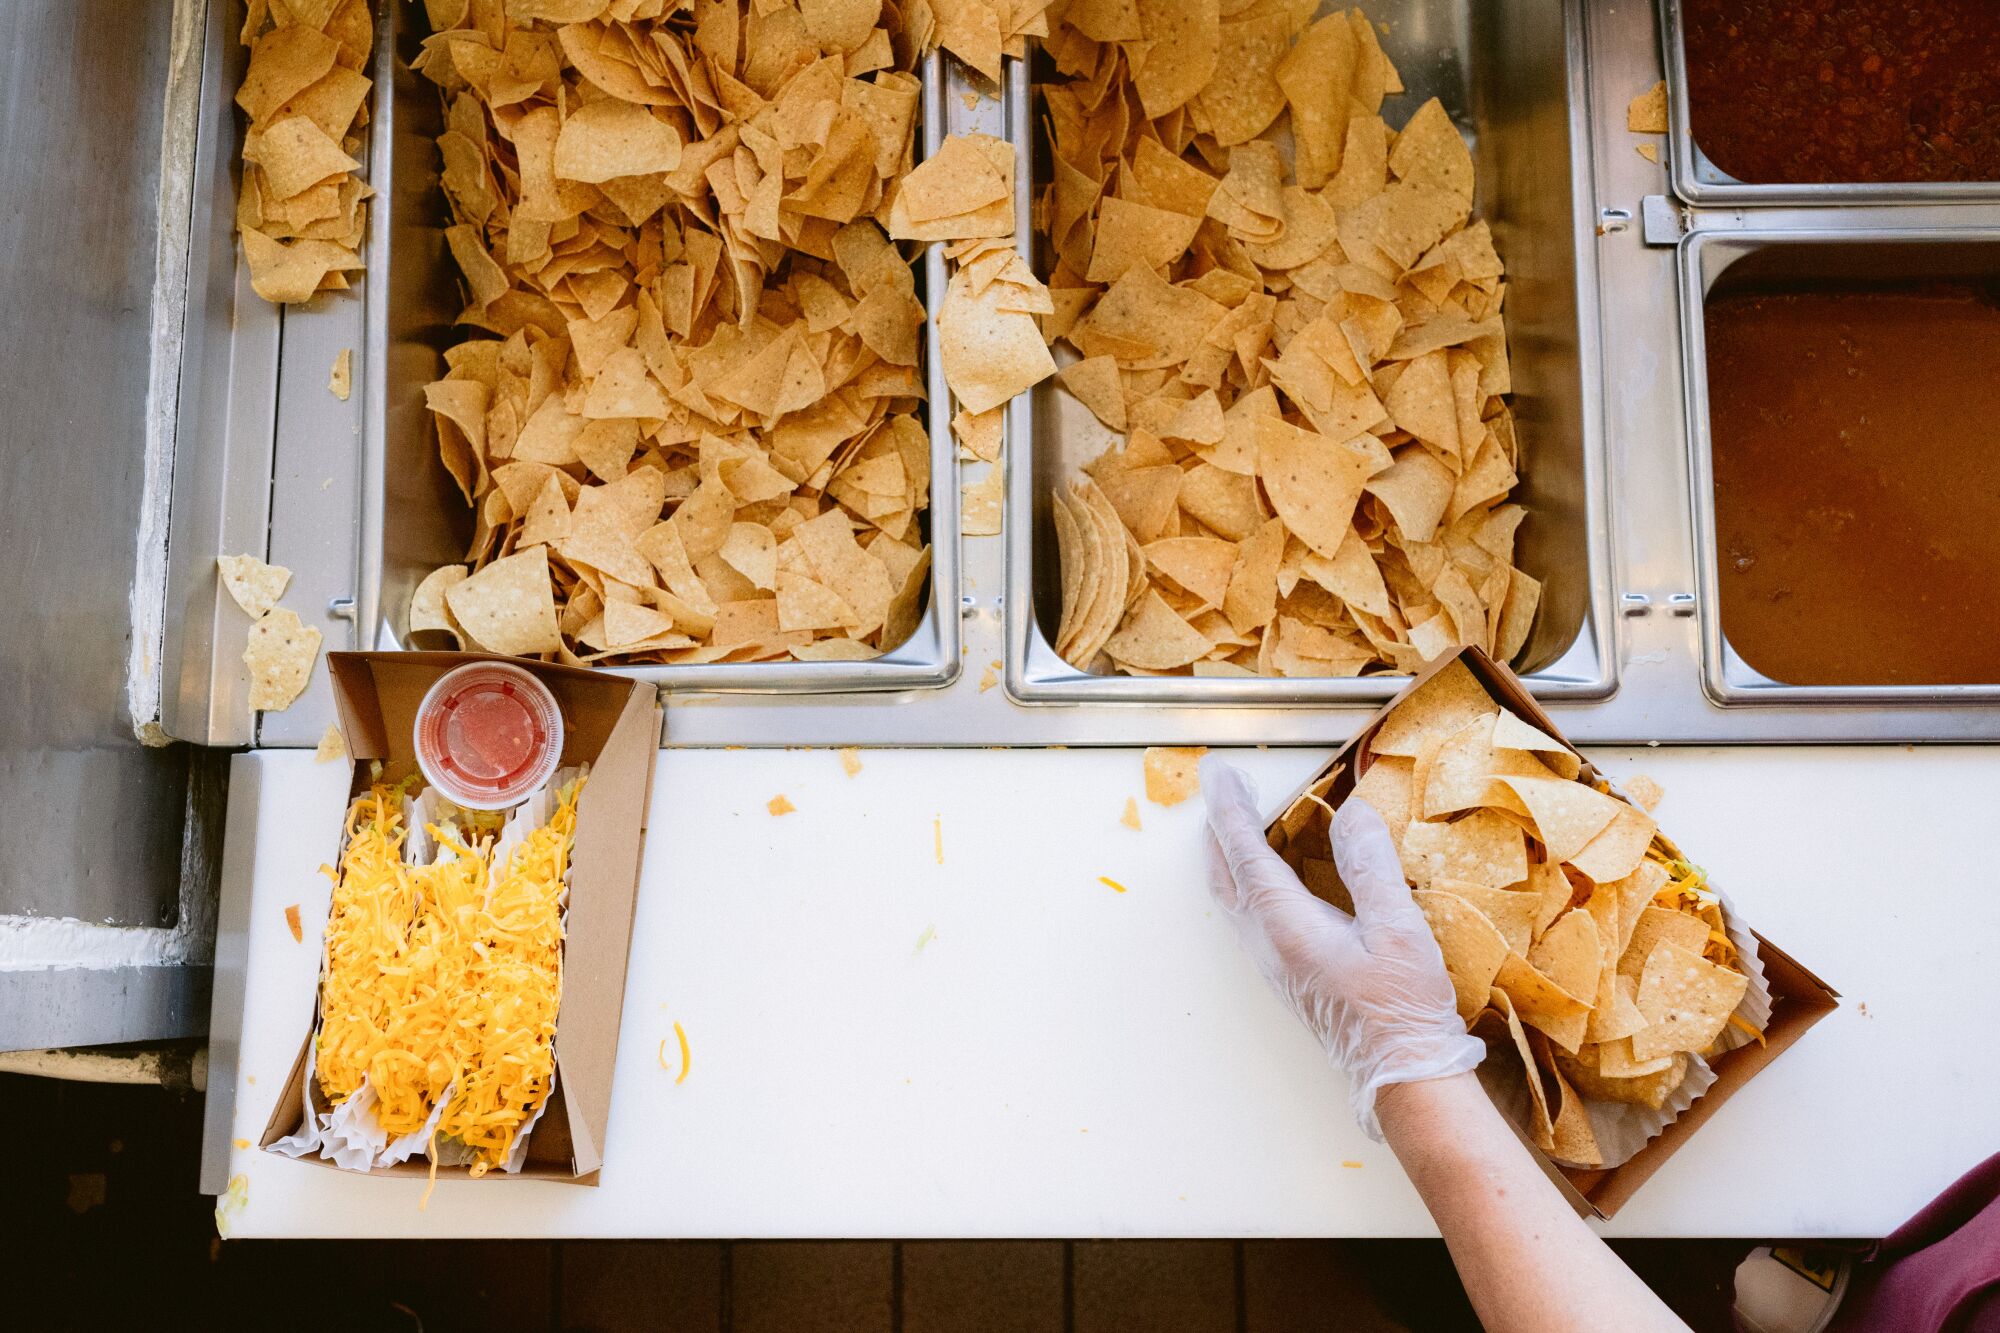 Overhead image of hands boxing up tacos and chips.